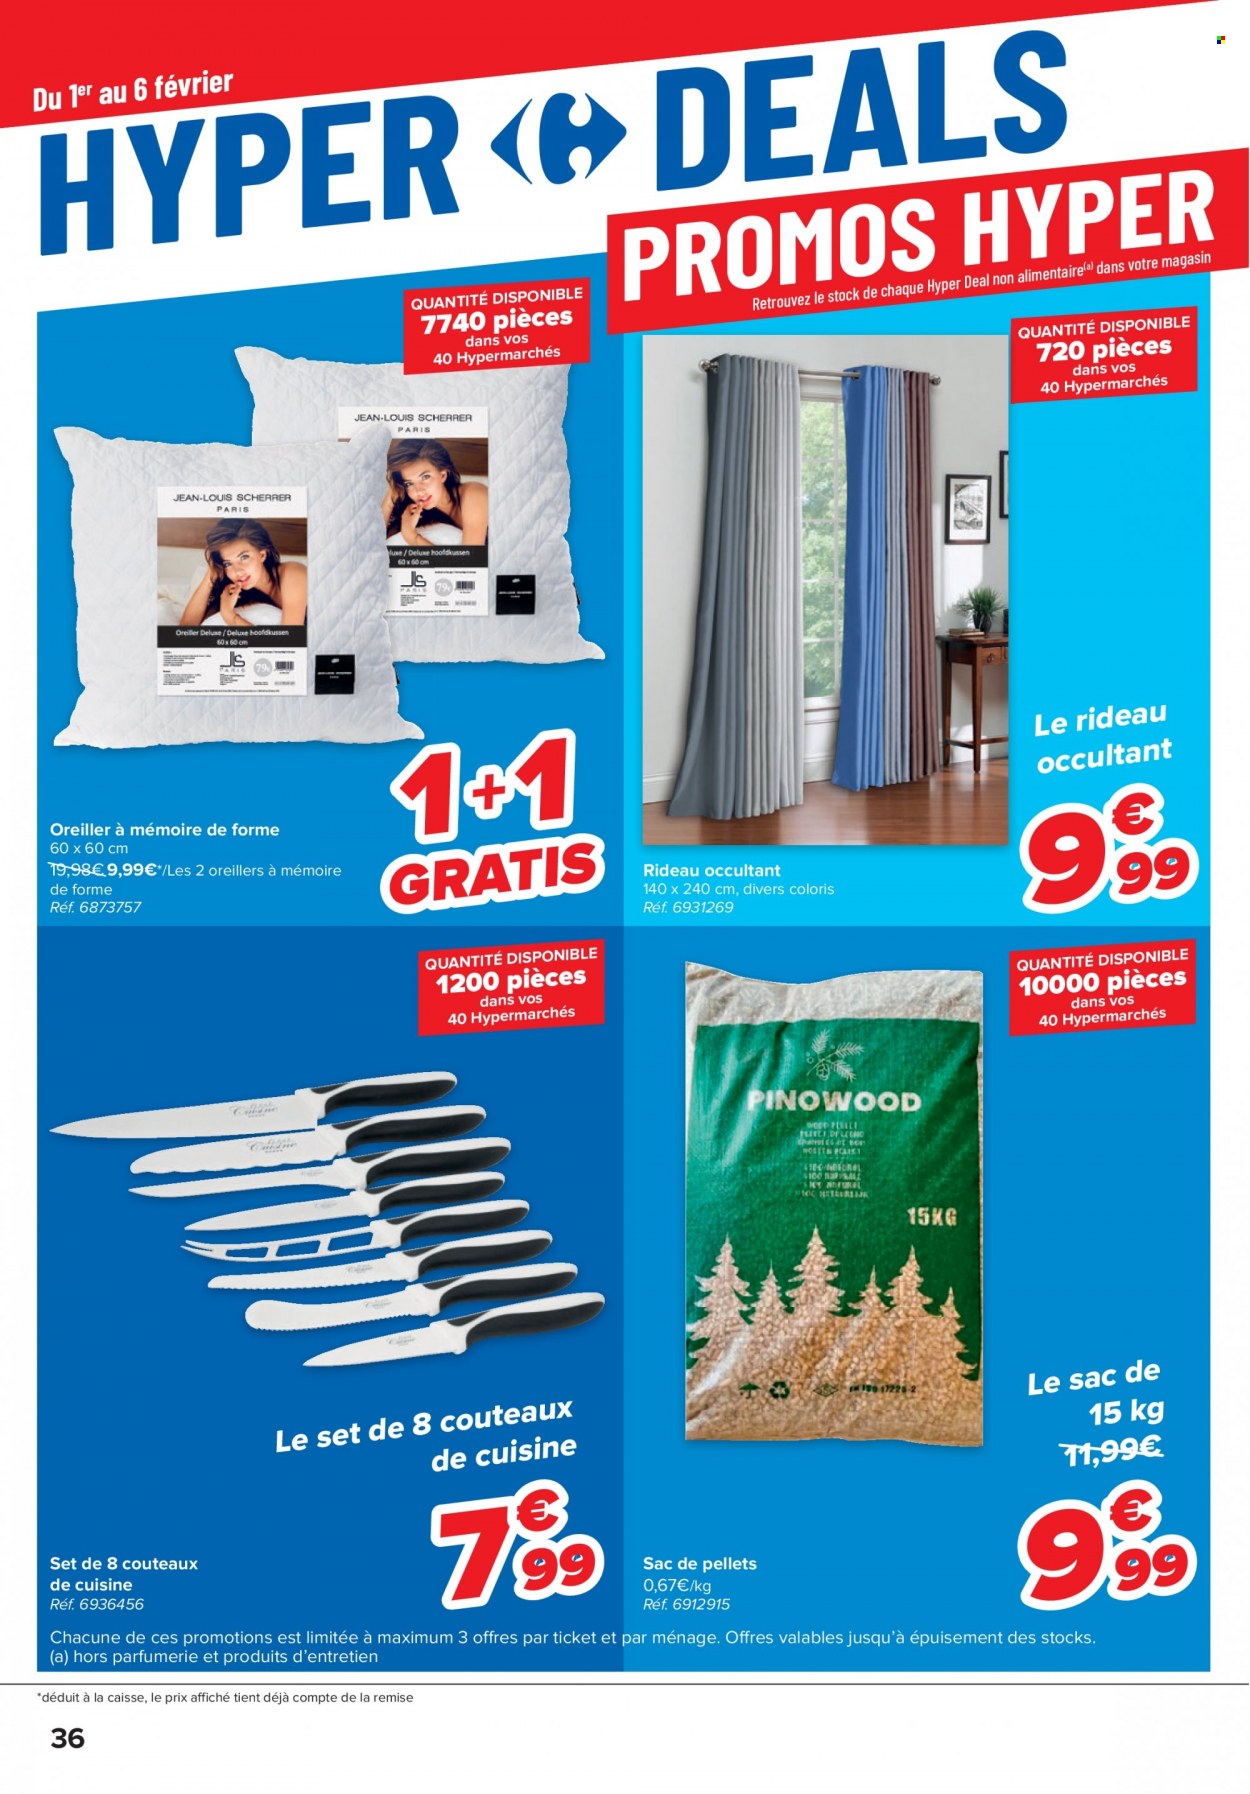 Catalogue Carrefour hypermarkt - 1.2.2023 - 13.2.2023. Page 36.